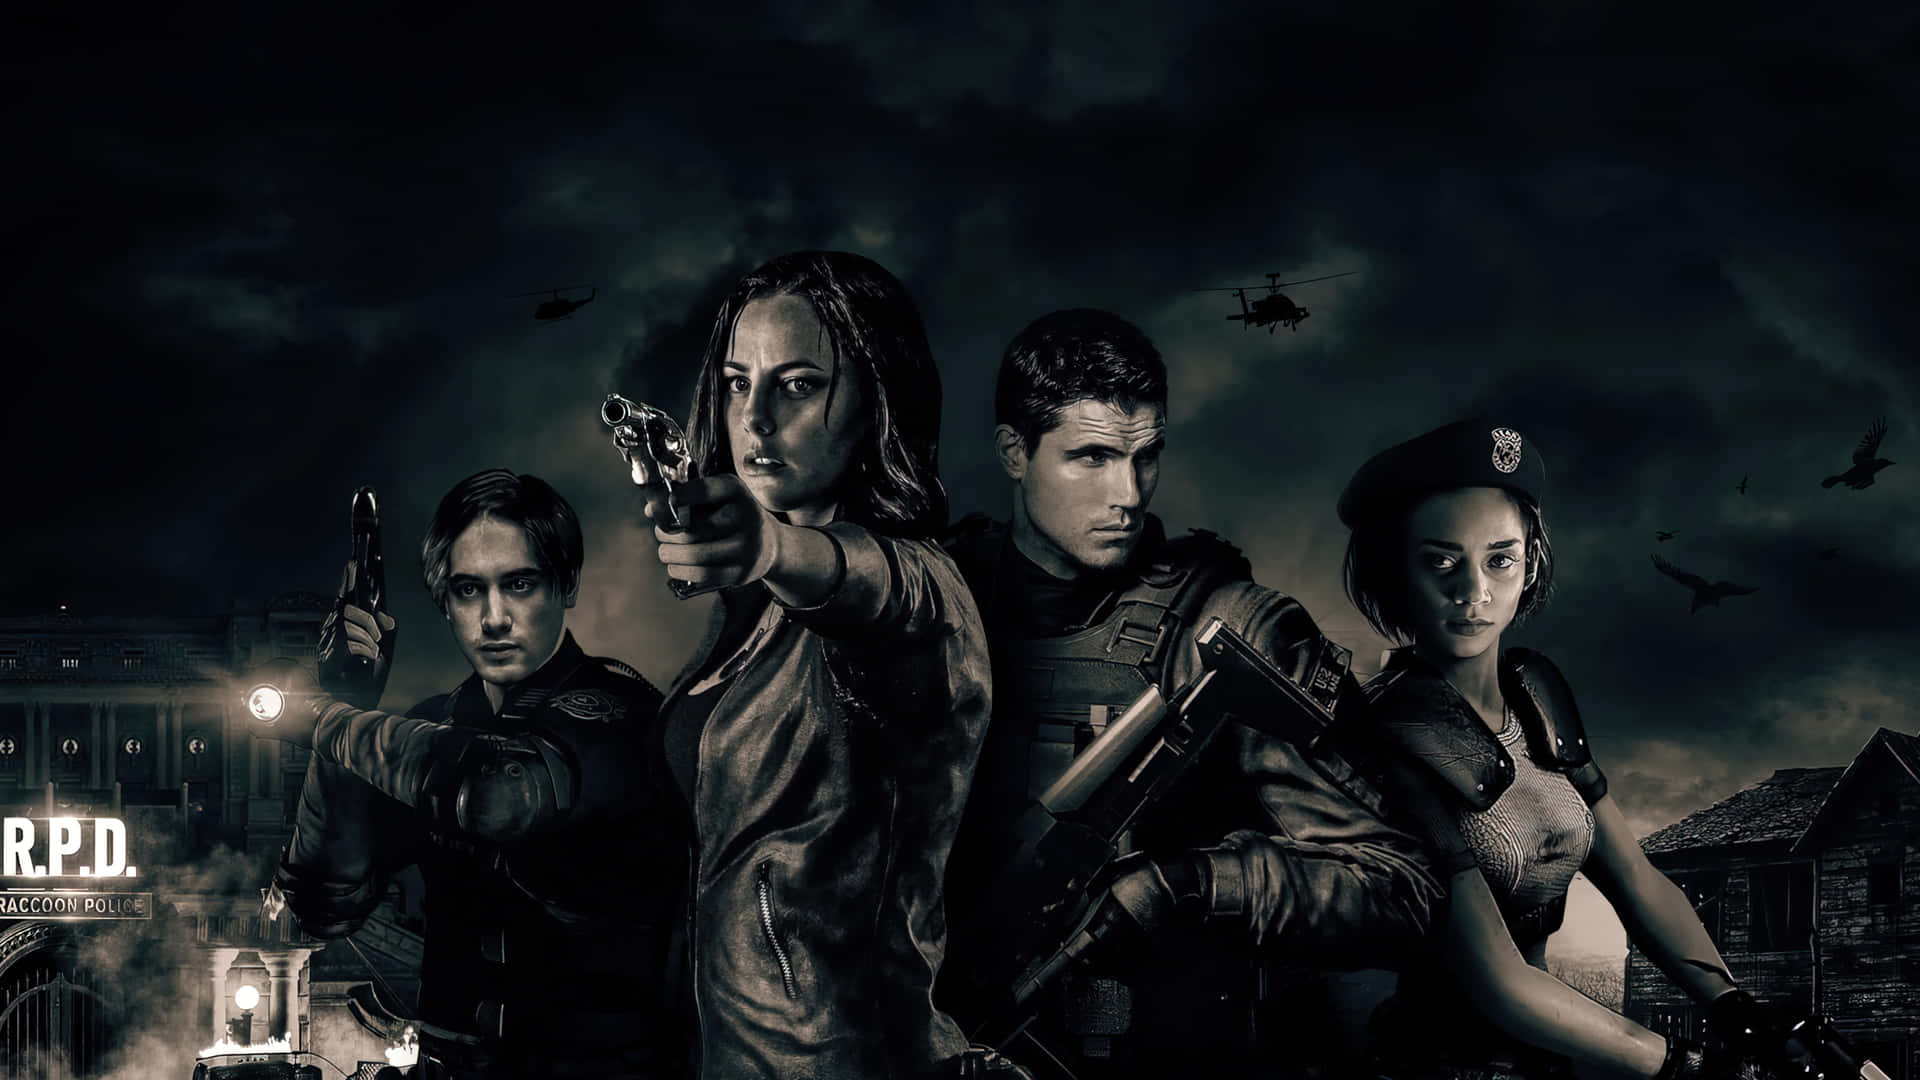 A memorable moment featuring iconic Resident Evil characters Wallpaper